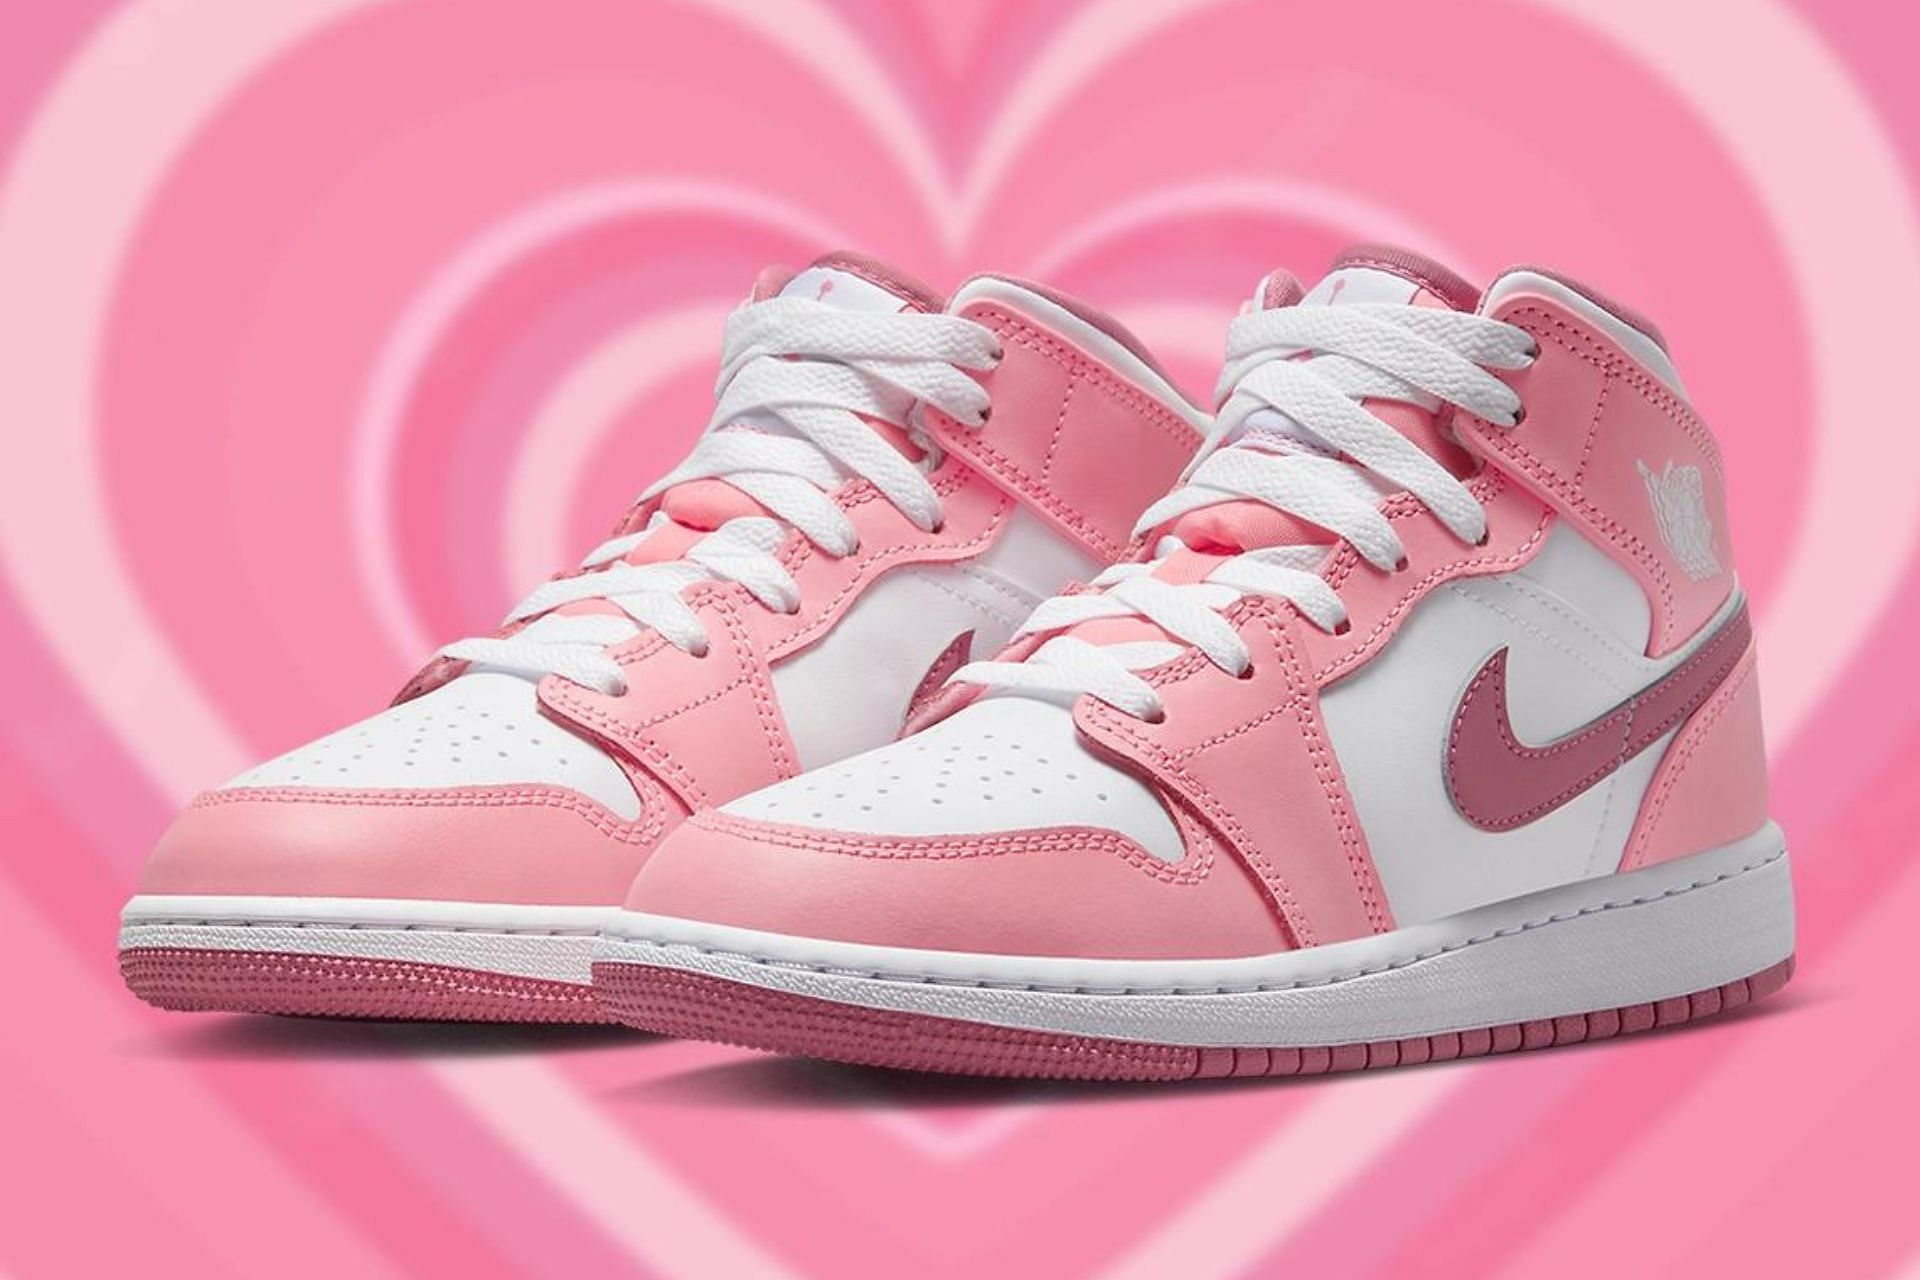 Air Jordan 1 Mid: Nike'S Air Jordan 1 Mid “Pink/White” Shoes: Where To Buy,  Price, And More Details Explored